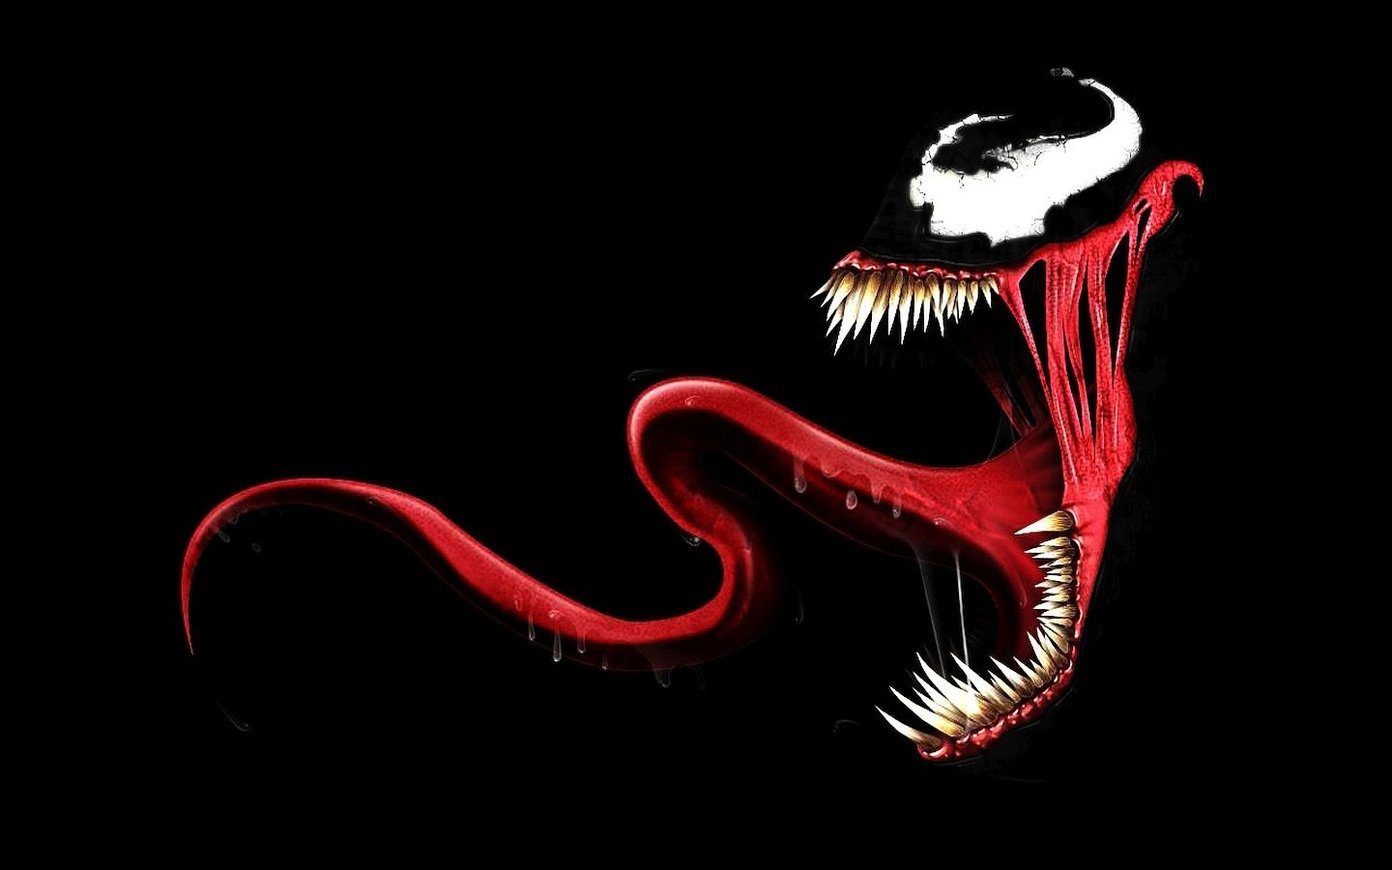 Best Venom Hd Wallpapers That You Should Get Right Now 8